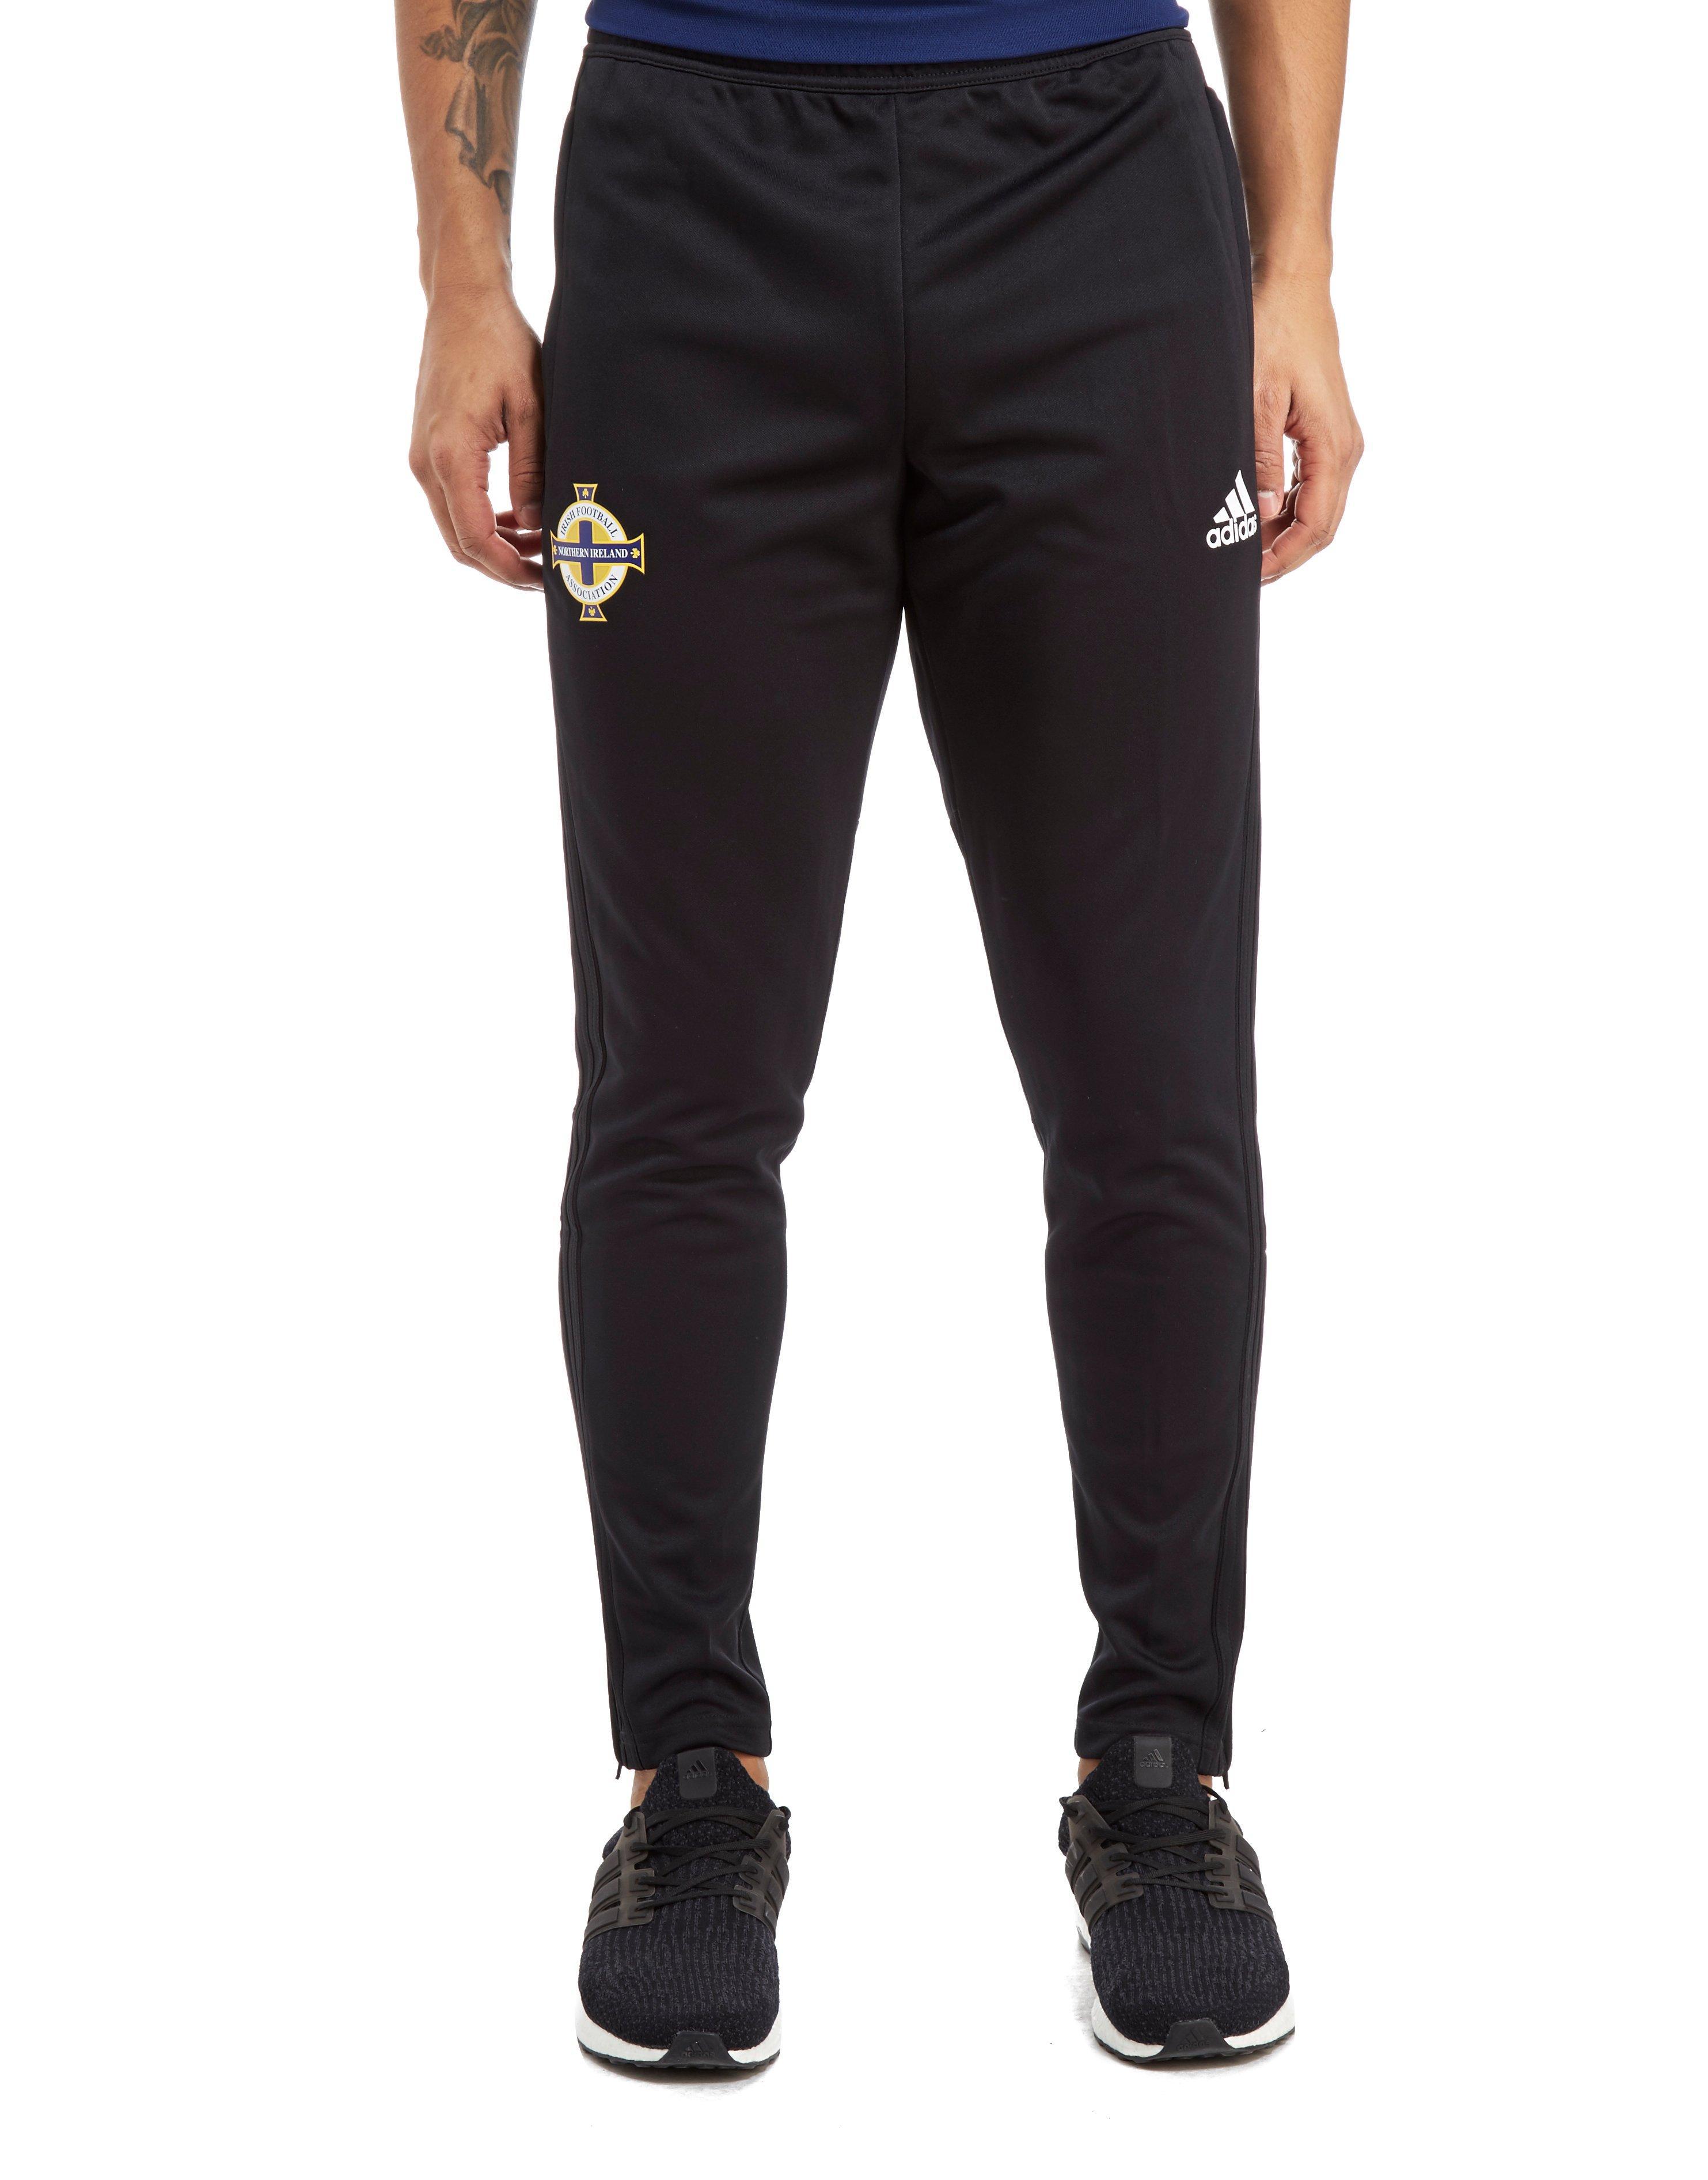 Lyst - Adidas Northern Ireland 2018 Training Pants in Black for Men